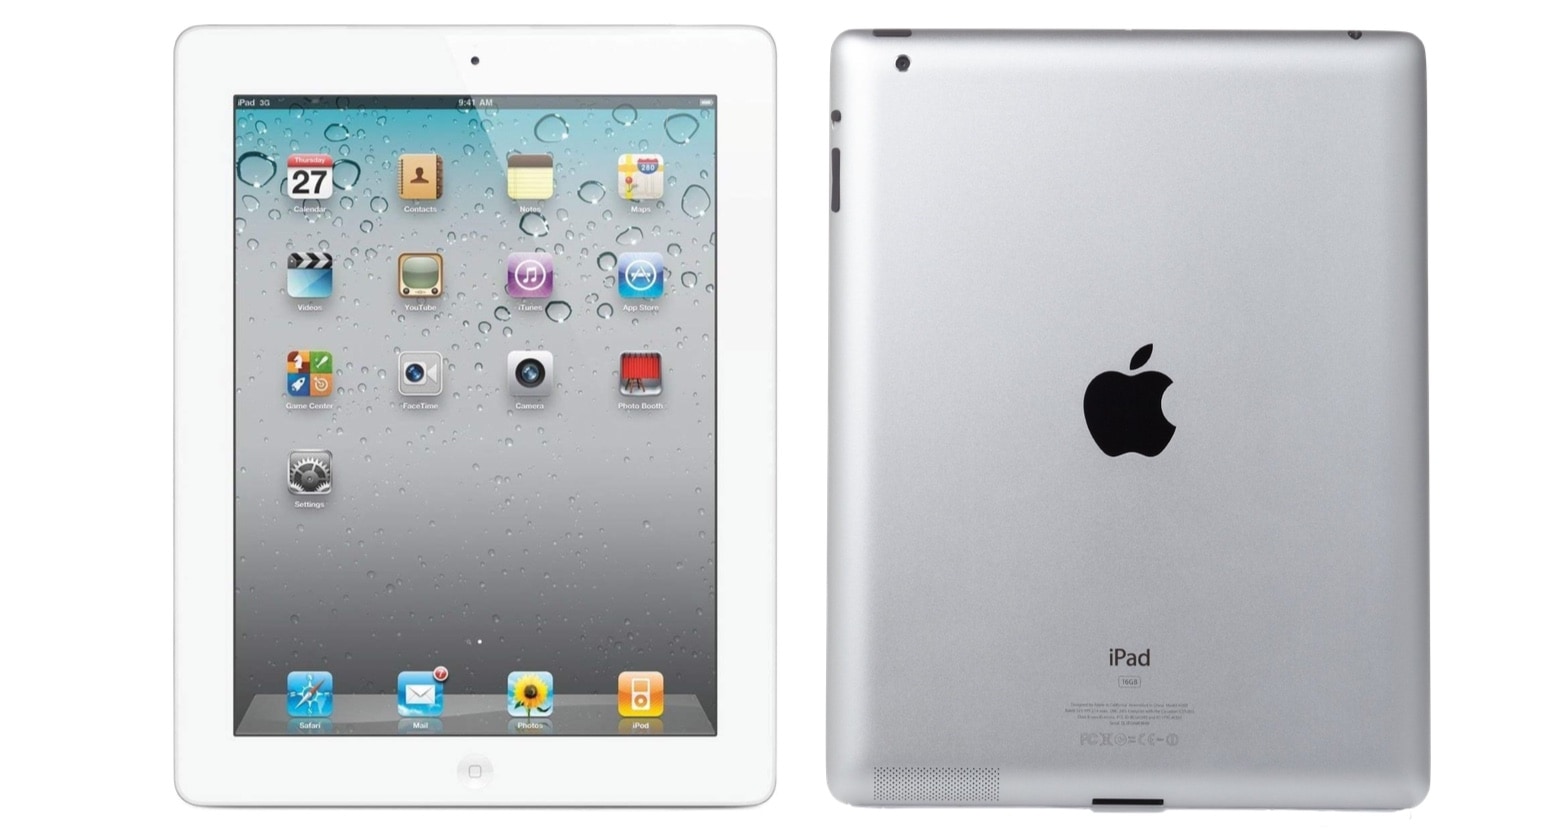 iPad 2 is so old it doesn’t have a Lightning port. And it has a single speaker.